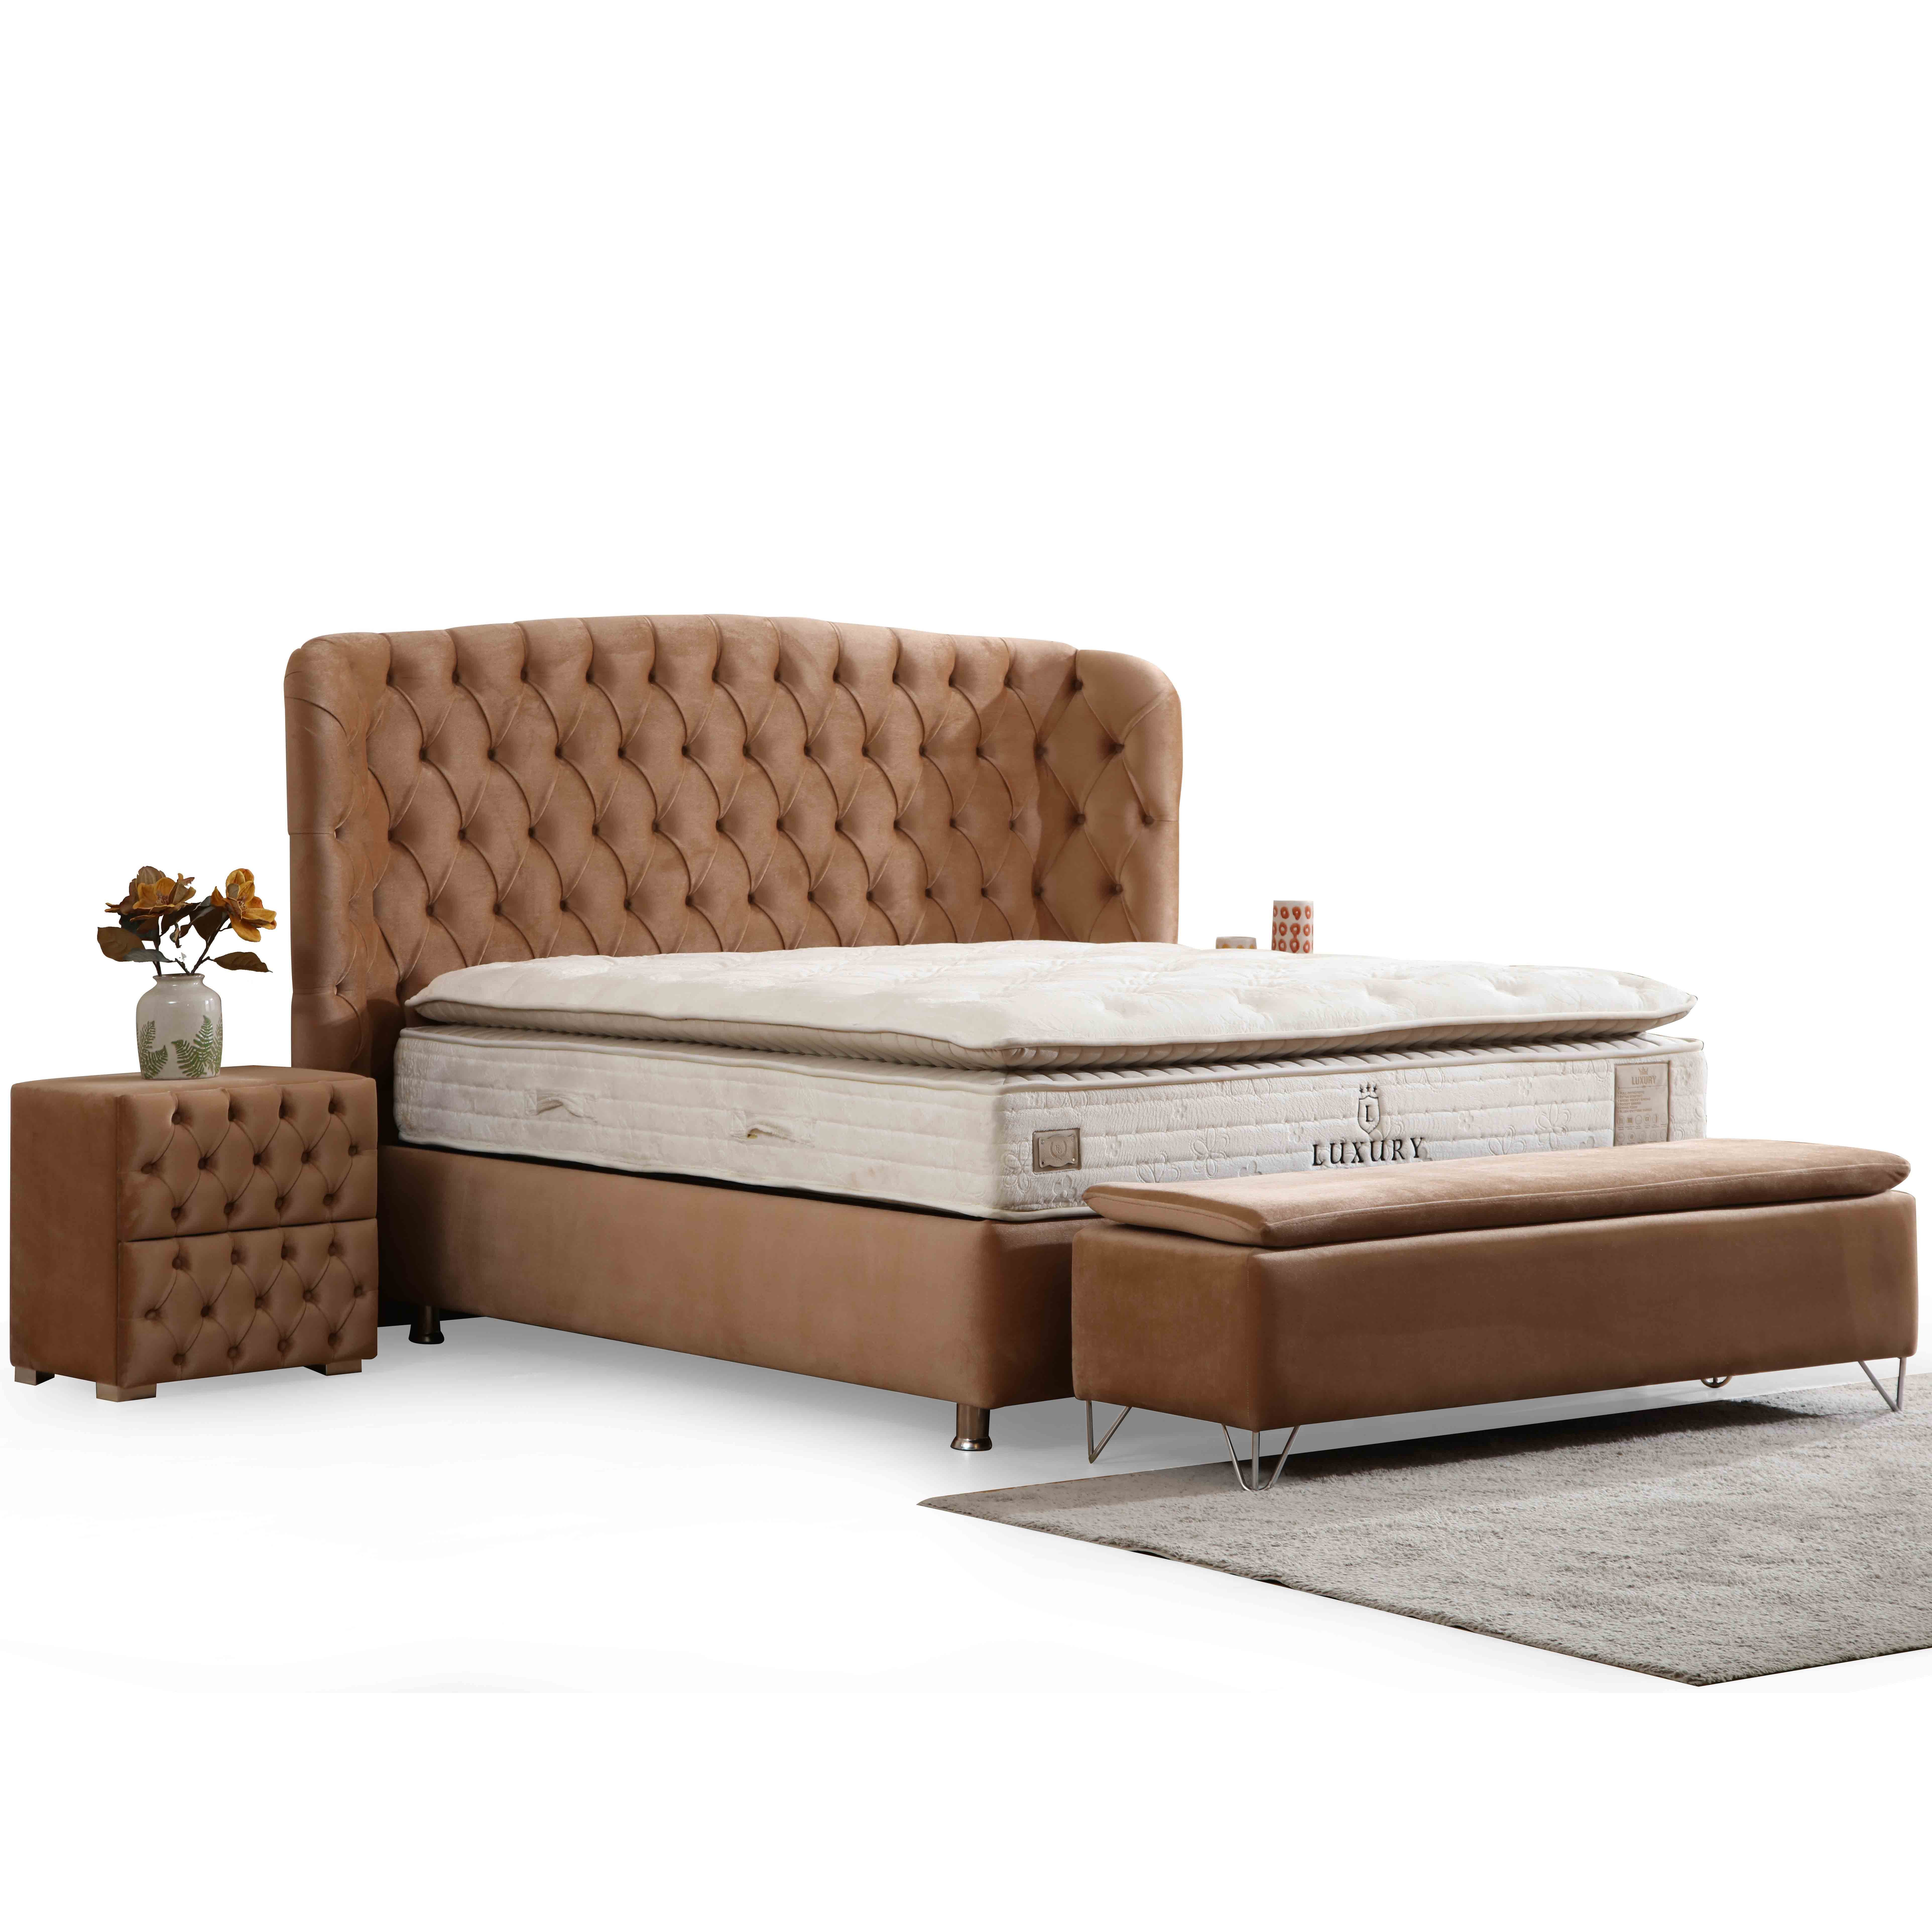 Riva Bedroom (Bed With Storage 120x200cm)